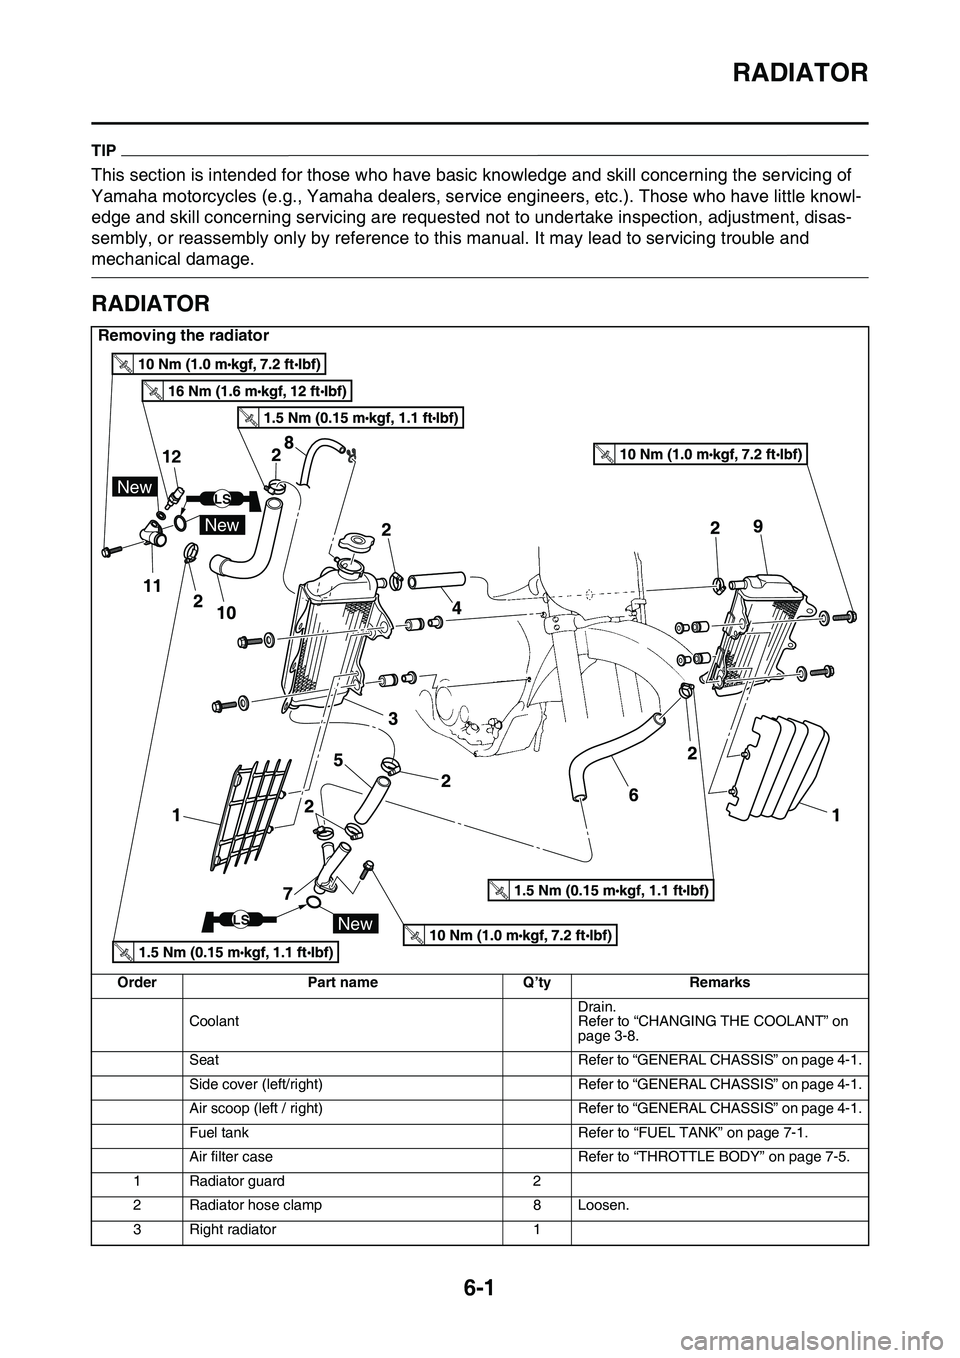 YAMAHA YZ450F 2014 Owners Guide RADIATOR
6-1
EAS1SL1294
TIP
This section is intended for those who have basic knowledge and skill concerning the servicing of 
Yamaha motorcycles (e.g., Yamaha dealers, service engineers, etc.). Those